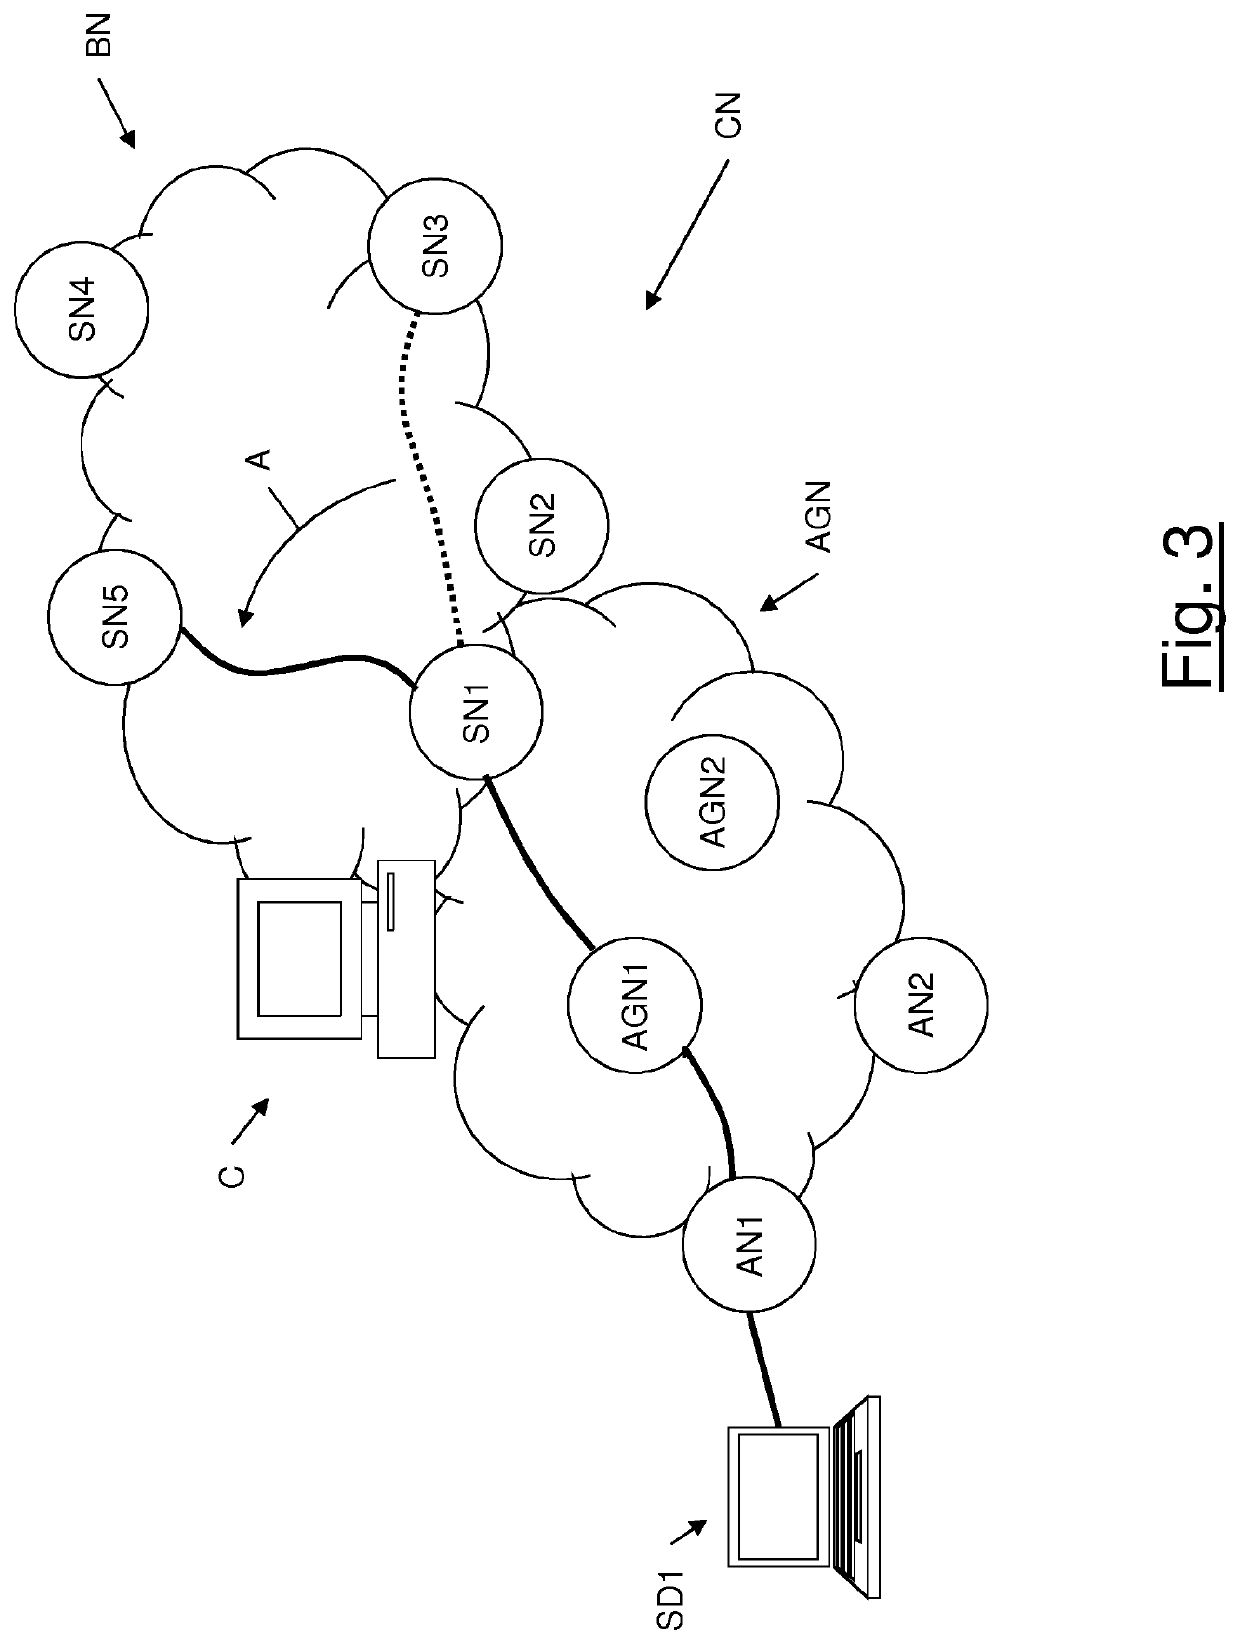 Subscriber session re-distribution in a communication network